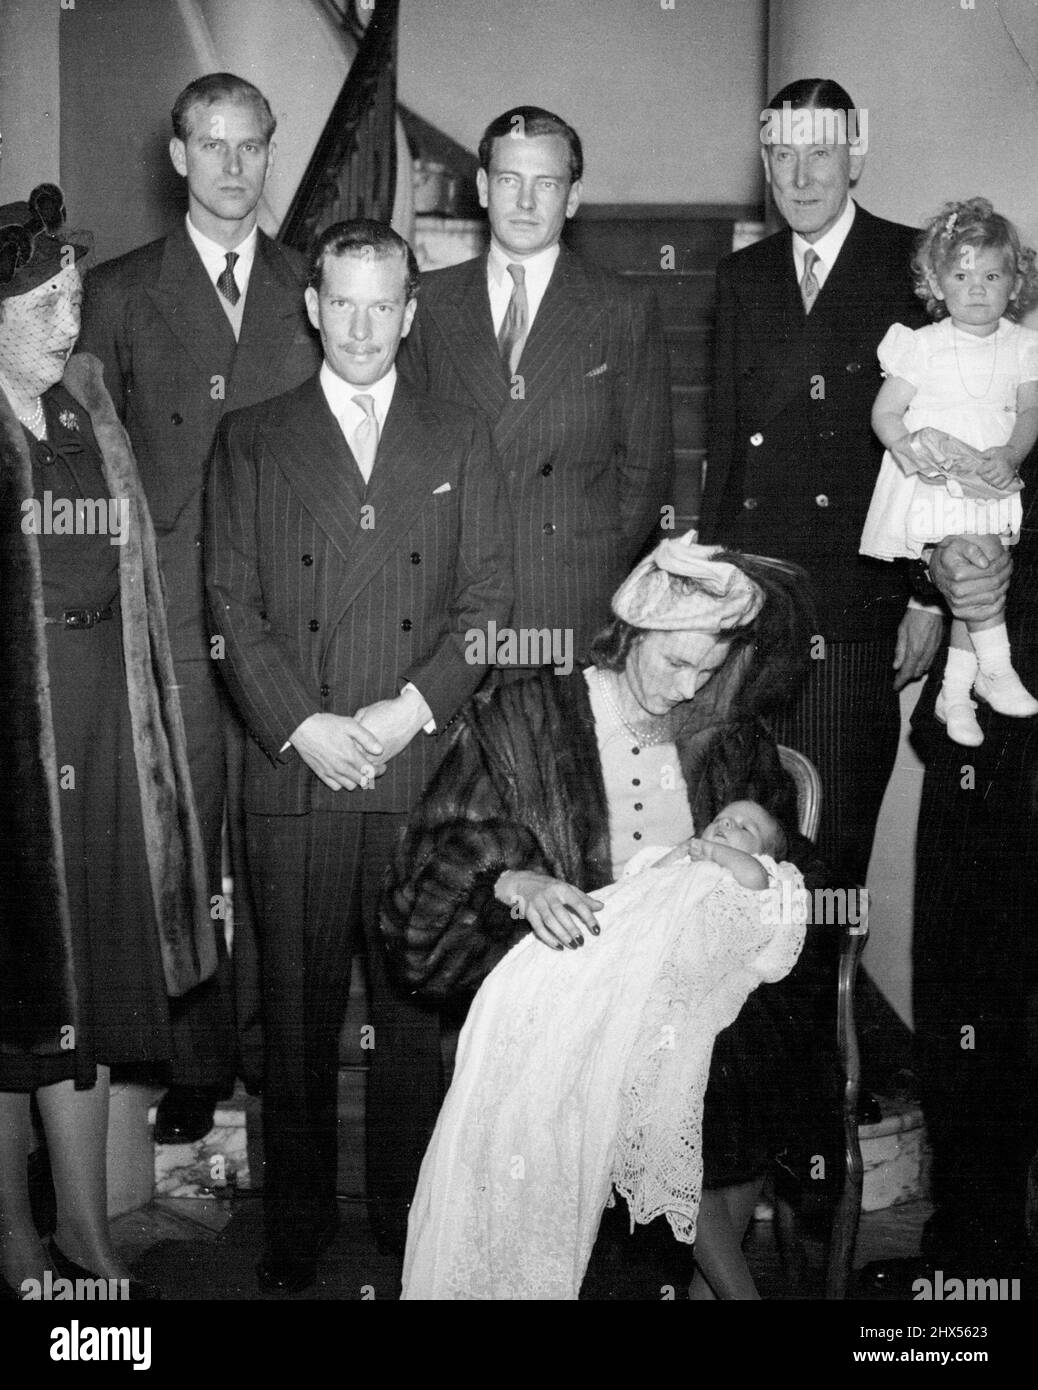 Lt. Mountbatten God-Parent At ChristeningPicture at Lt. -Col. Philips' home in Grosvenor-square, London, today, following the christening ceremony are (left to right standing) Lady Zia Wernher, Lieut. Philip Mountbatten, Major D. Butters the Marquess of Milford Haven Colonel, H. Phillips, grand-father of the baby, and Sacha, daughter of Lt. -Col. and Mrs. Harold Phillips Mrs. Harold Phillips with her son Harold Nicholas, is seated in centre.Lieut. Philips Mountbatten R.N., and his fubure best-man the Marquess of Milford Haven, were god-parents at the christening ceremony of Harold Nicholas, ba Stock Photo